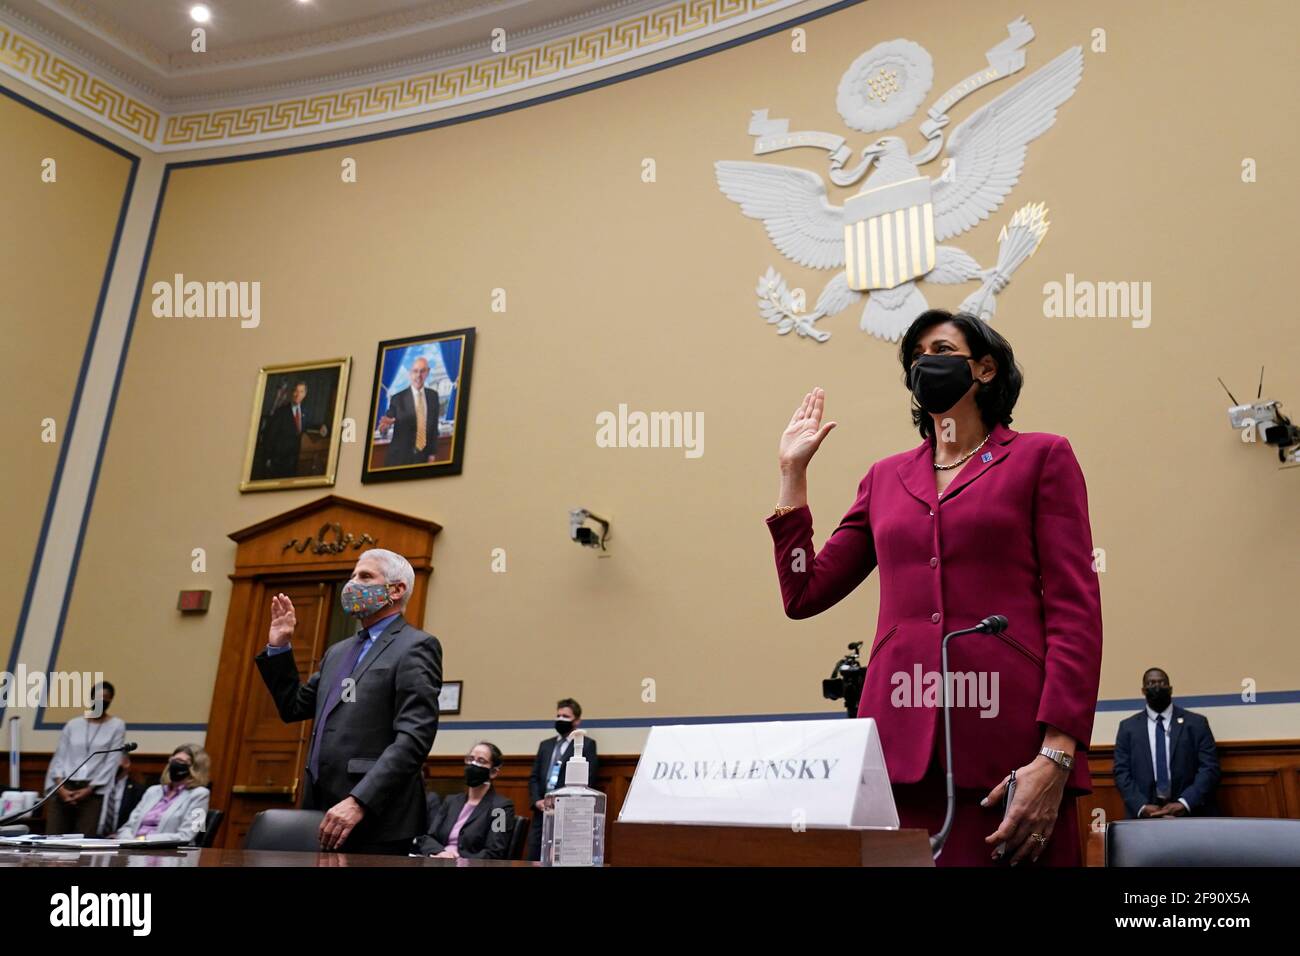 (210415) -- WASHINGTON, April 15, 2021 (Xinhua) -- Rochelle Walensky (R), director of the U.S. Centers for Disease Control and Prevention (CDC), is sworn in before testifying at a hearing of U.S. House Select Subcommittee on the Coronavirus Crisis in Washington, DC, the United States, on April 15, 2021. (Susan Walsh/Pool via Xinhua) Stock Photo